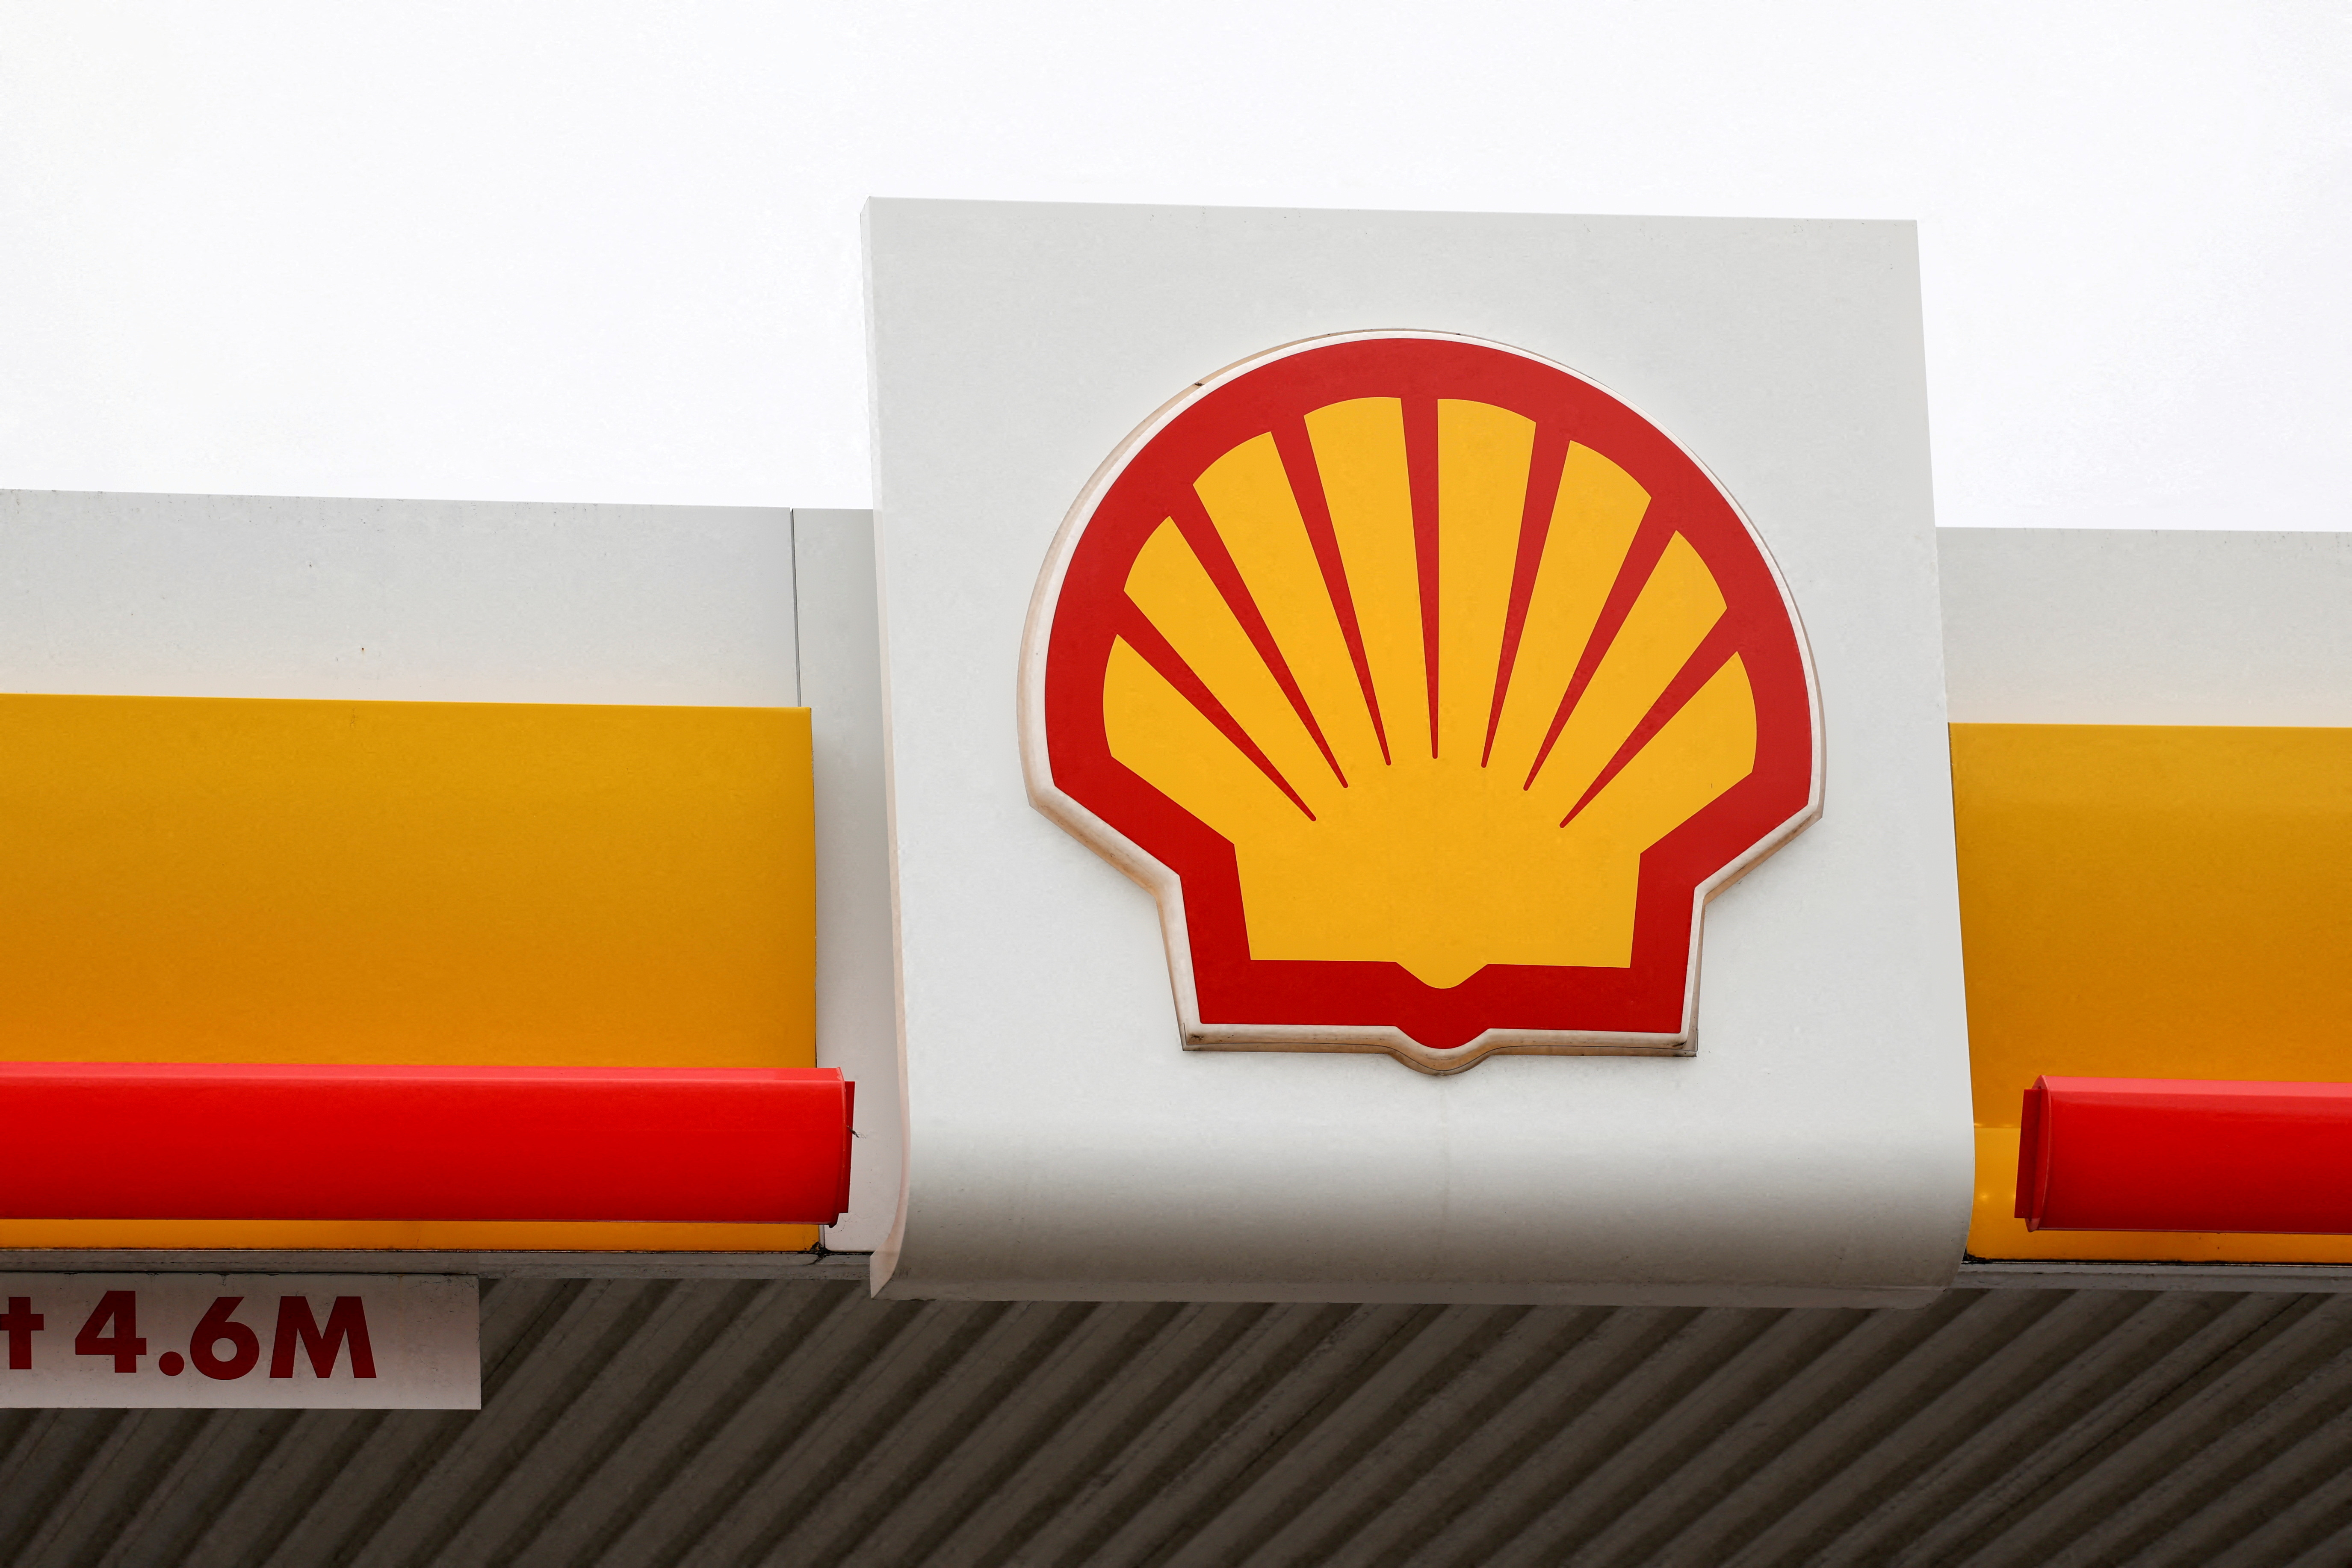 FILE PHOTO: A view shows a logo of Shell petrol station in South East London